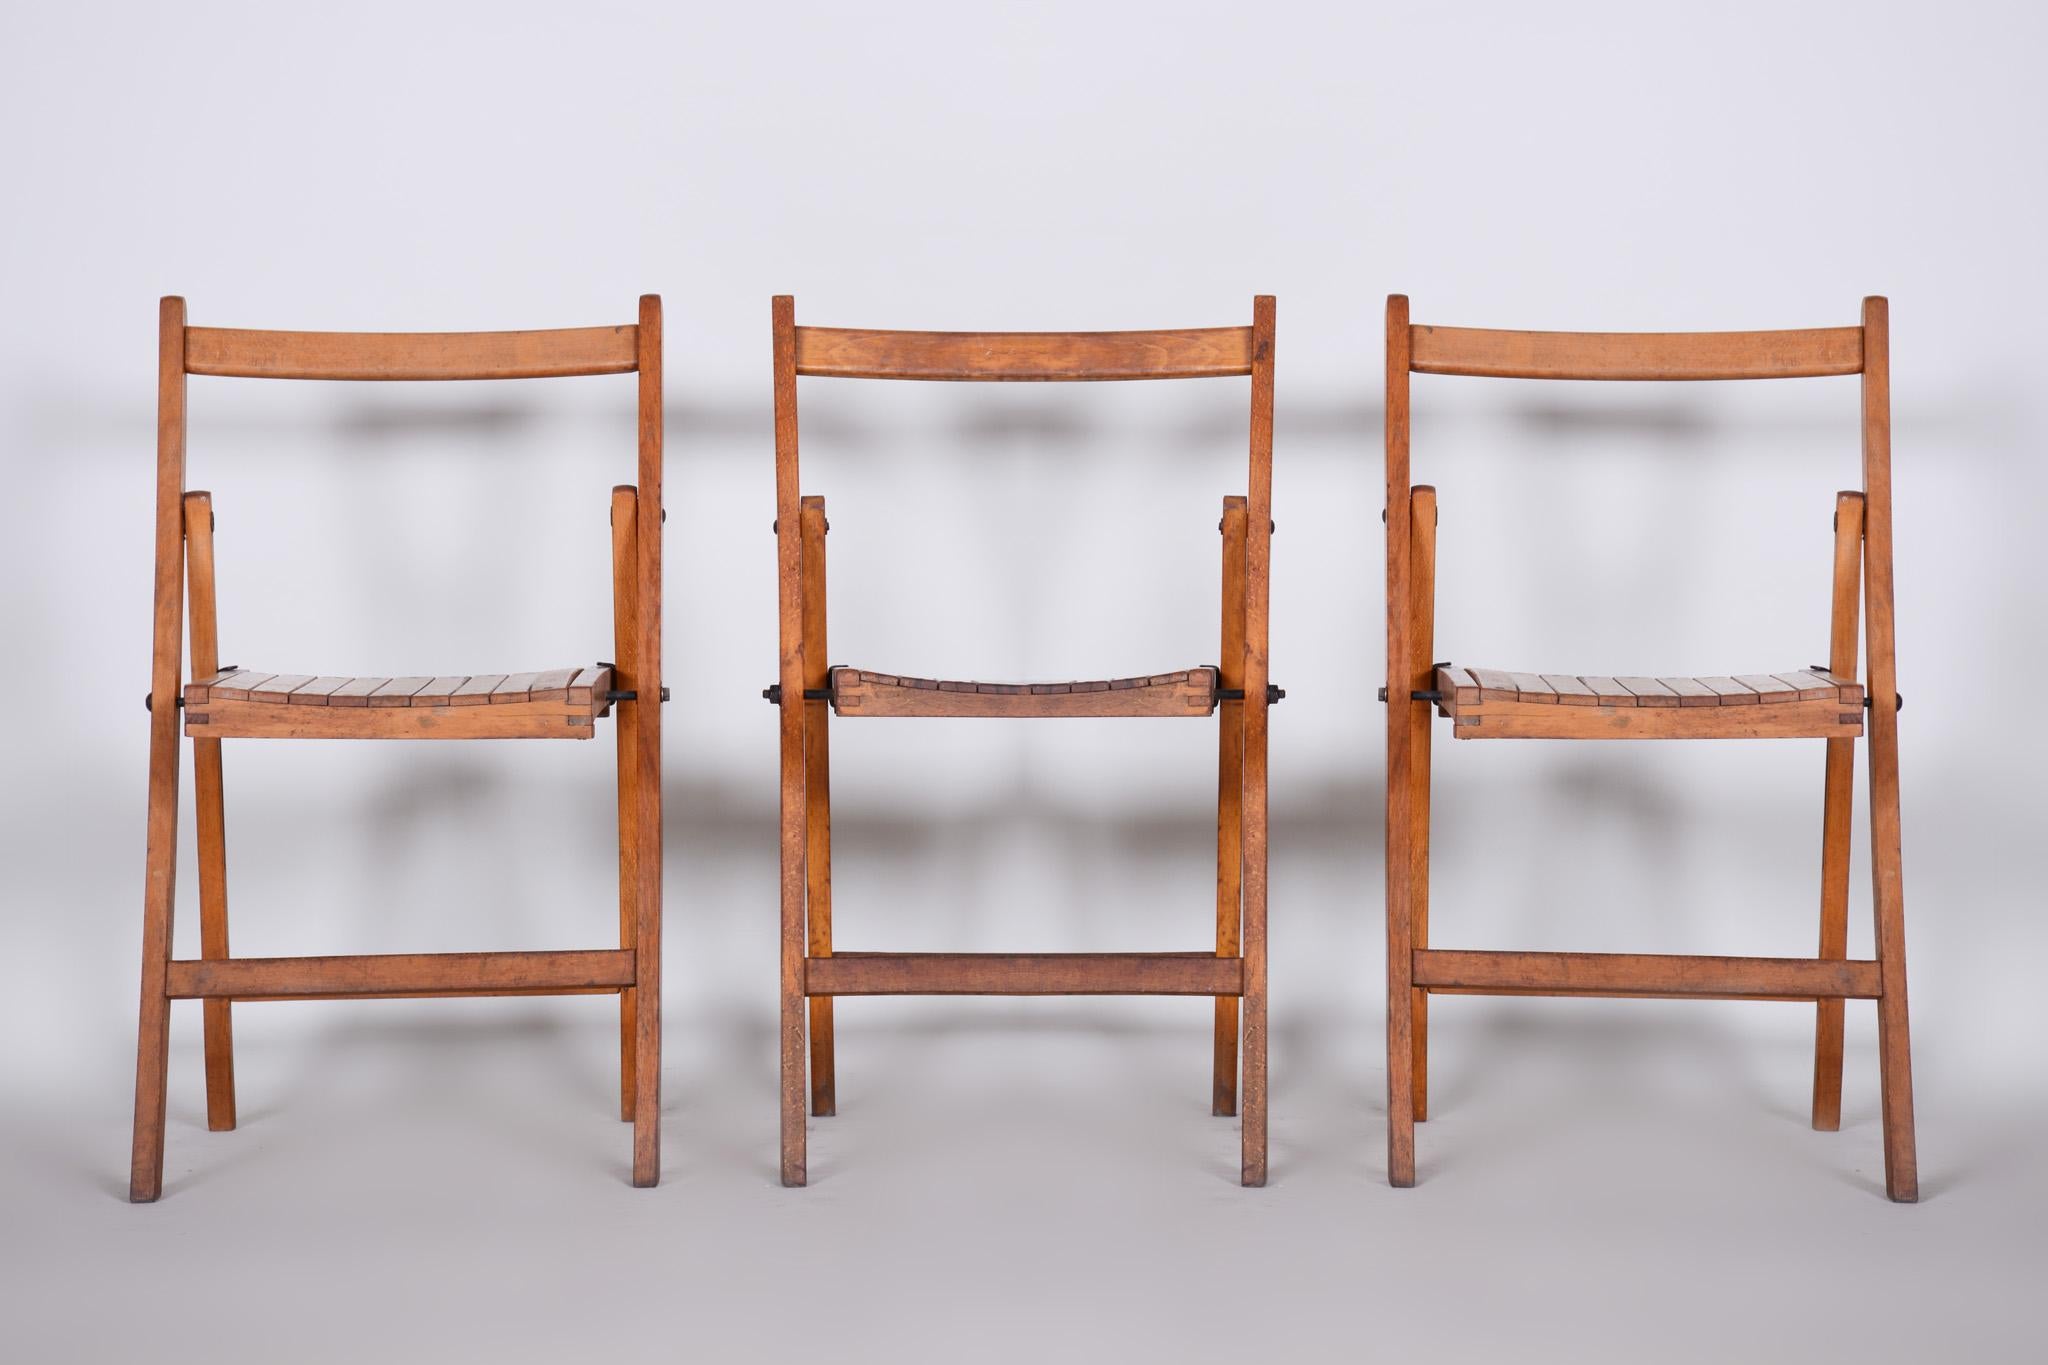 Beech Midcentury Chairs, 3 Pieces, 1950s, Well Preserved Condition For Sale 6